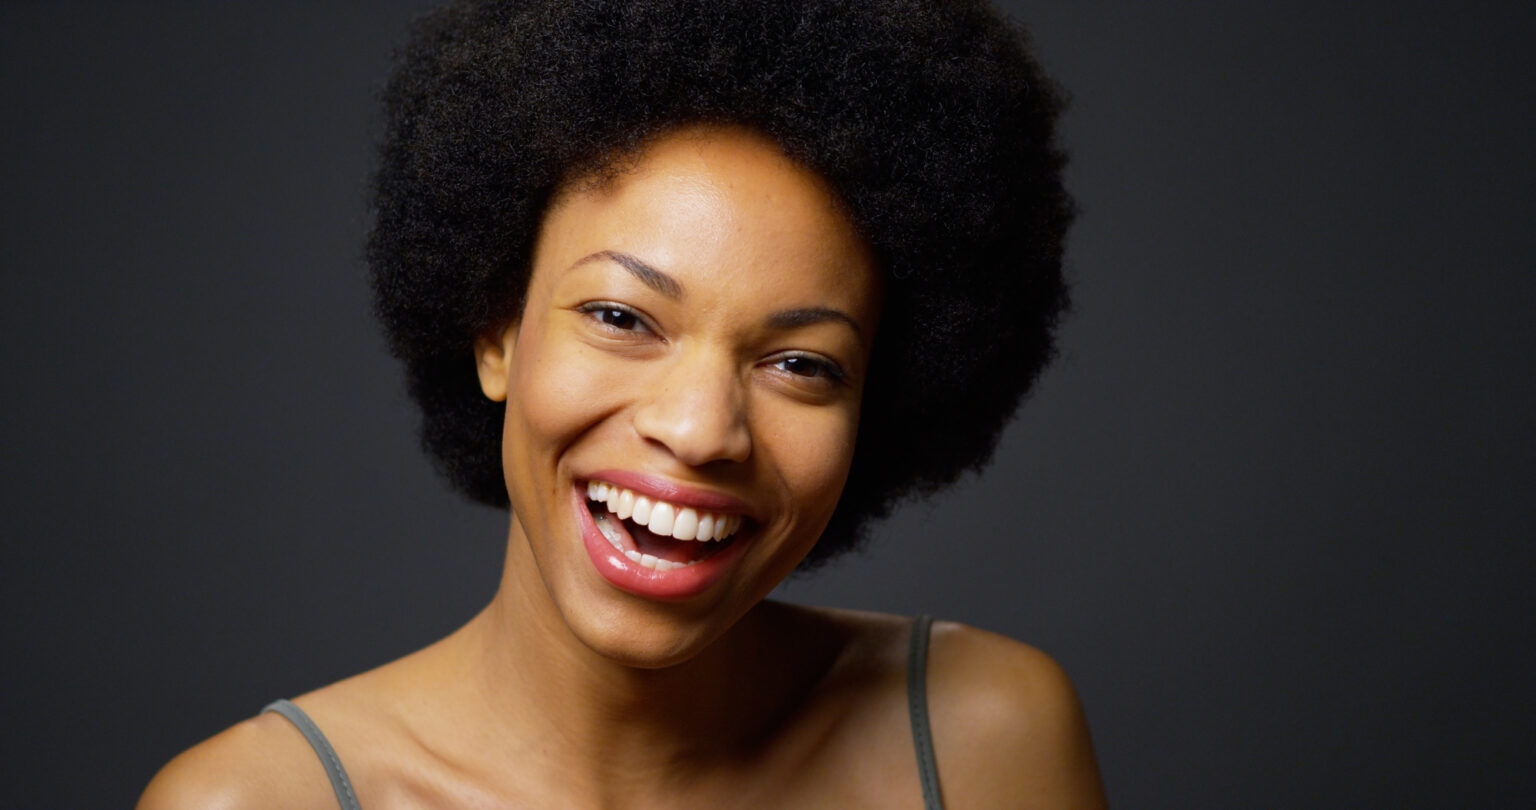 A smiling woman with an afro against a grey background in a dental clinic.